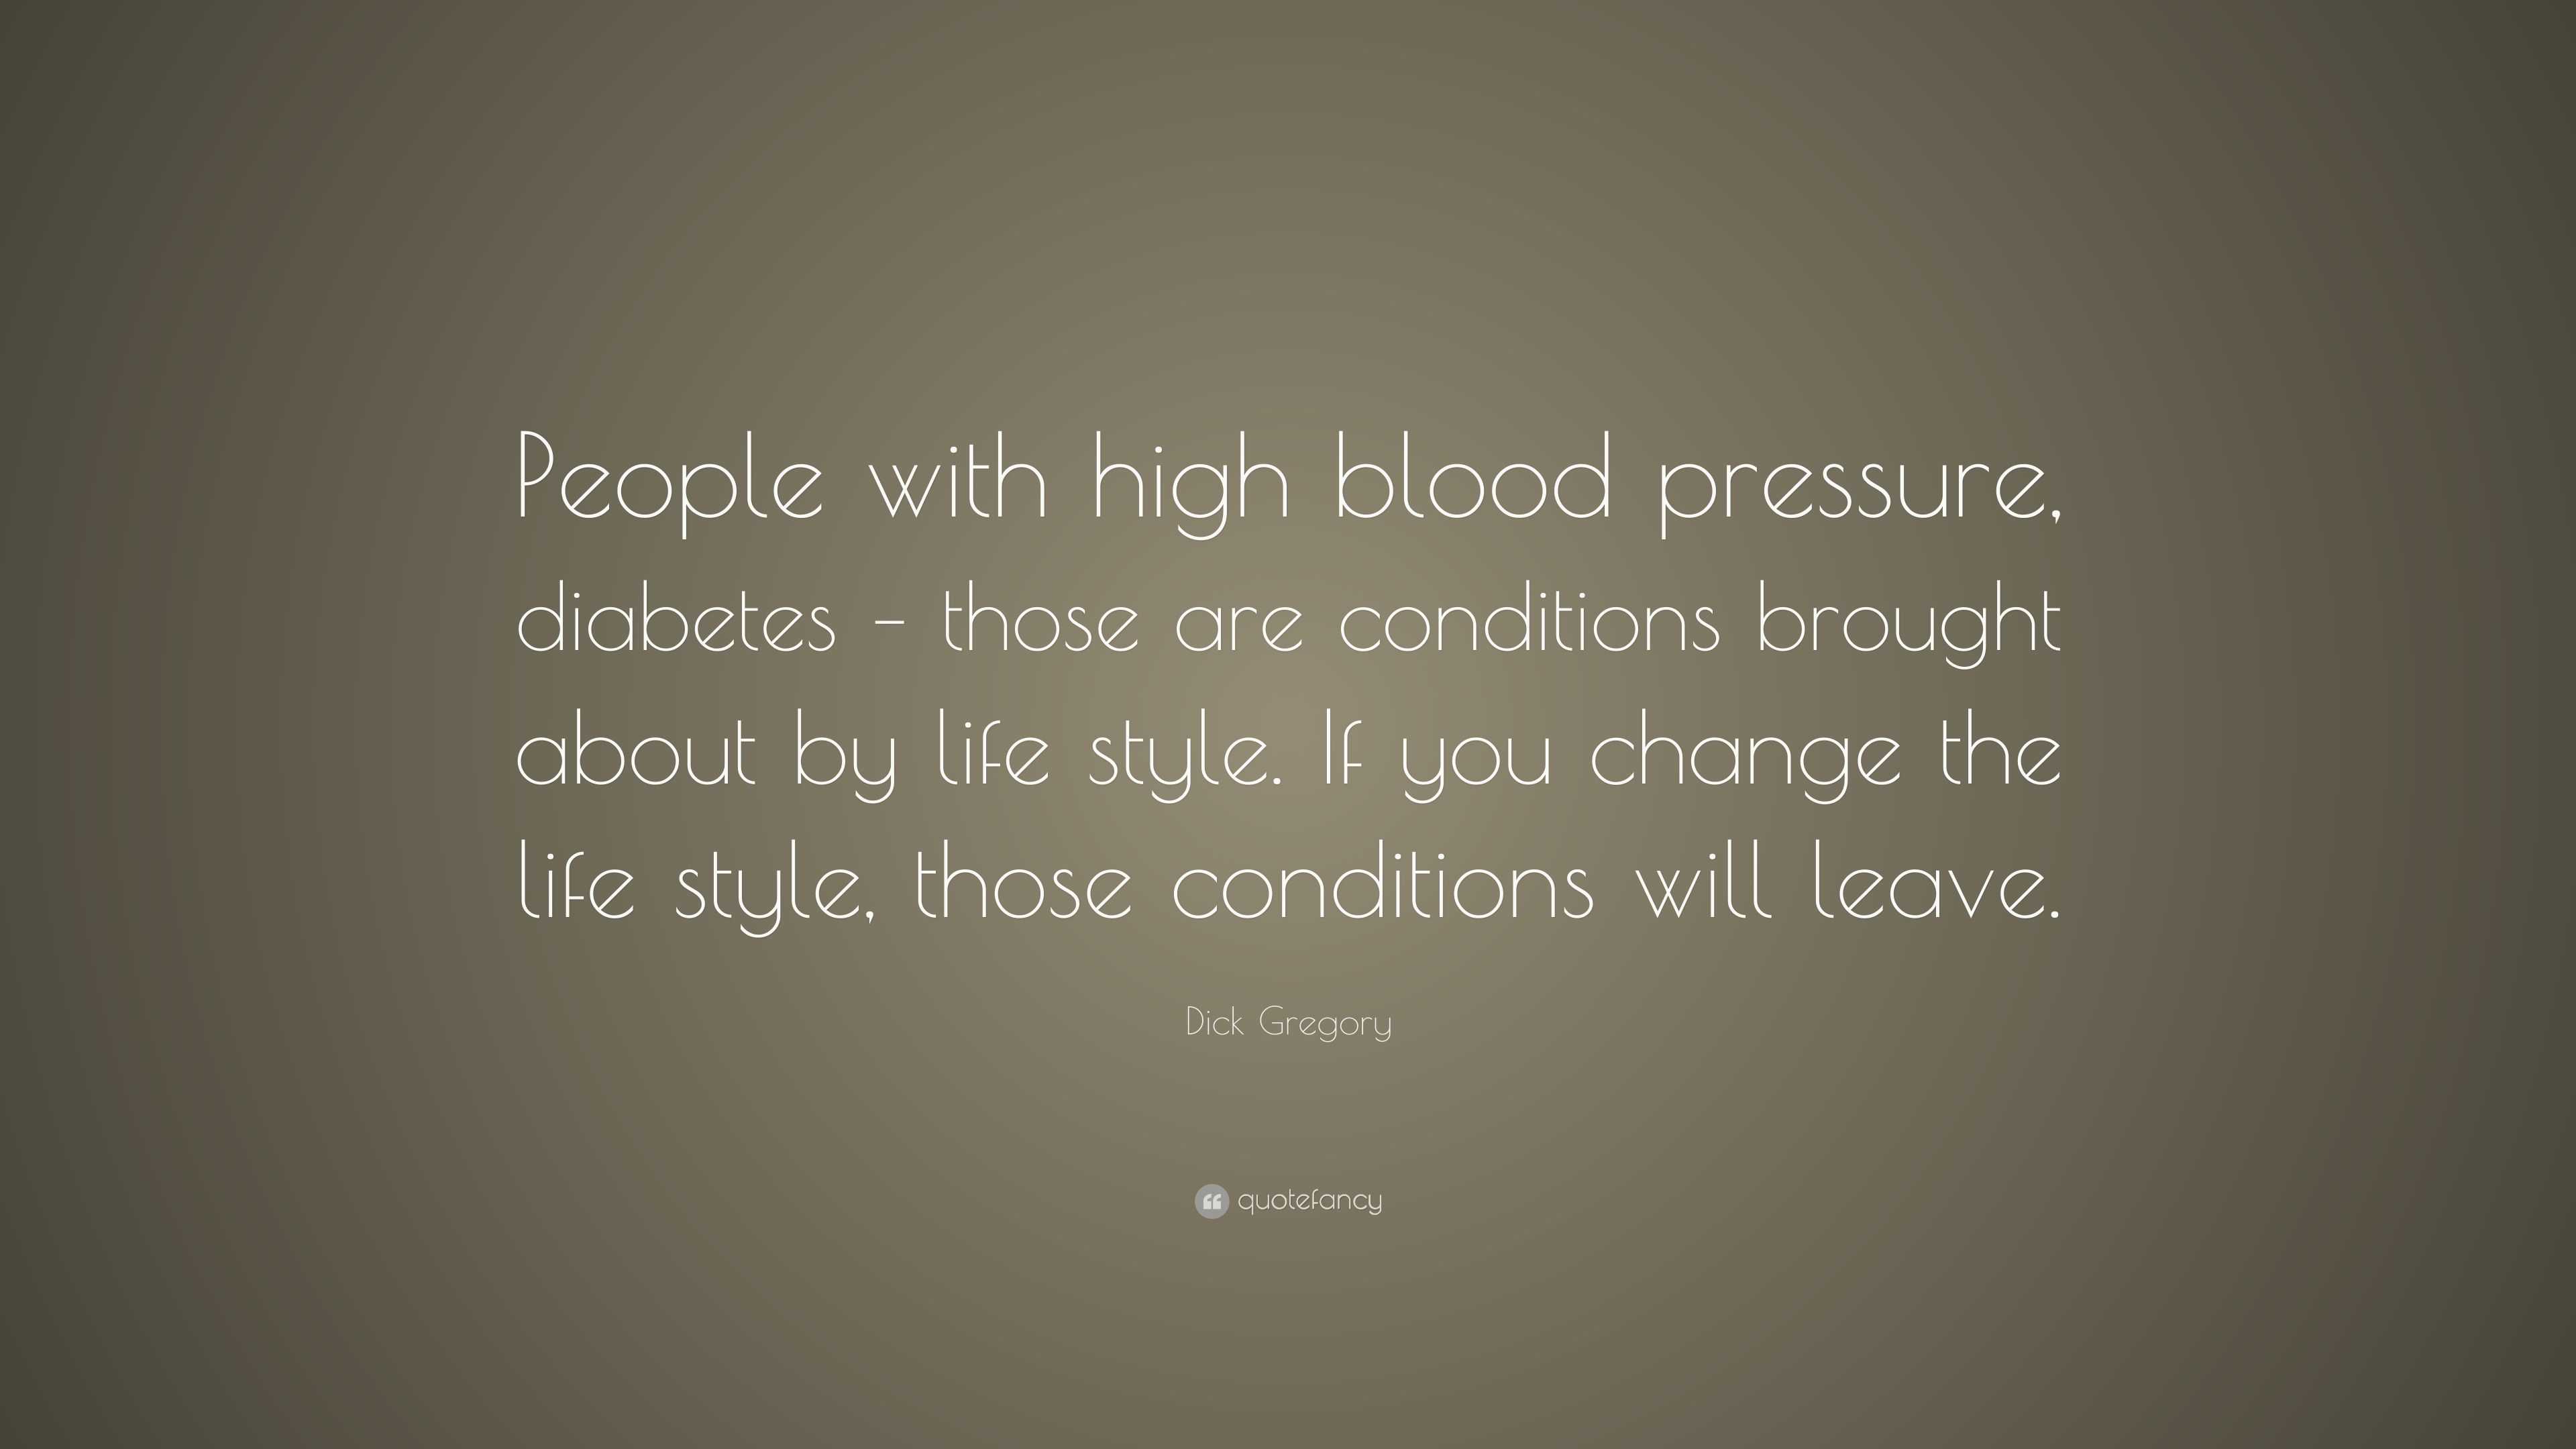 Life Insurance and High Blood Pressure - QuoteWizard